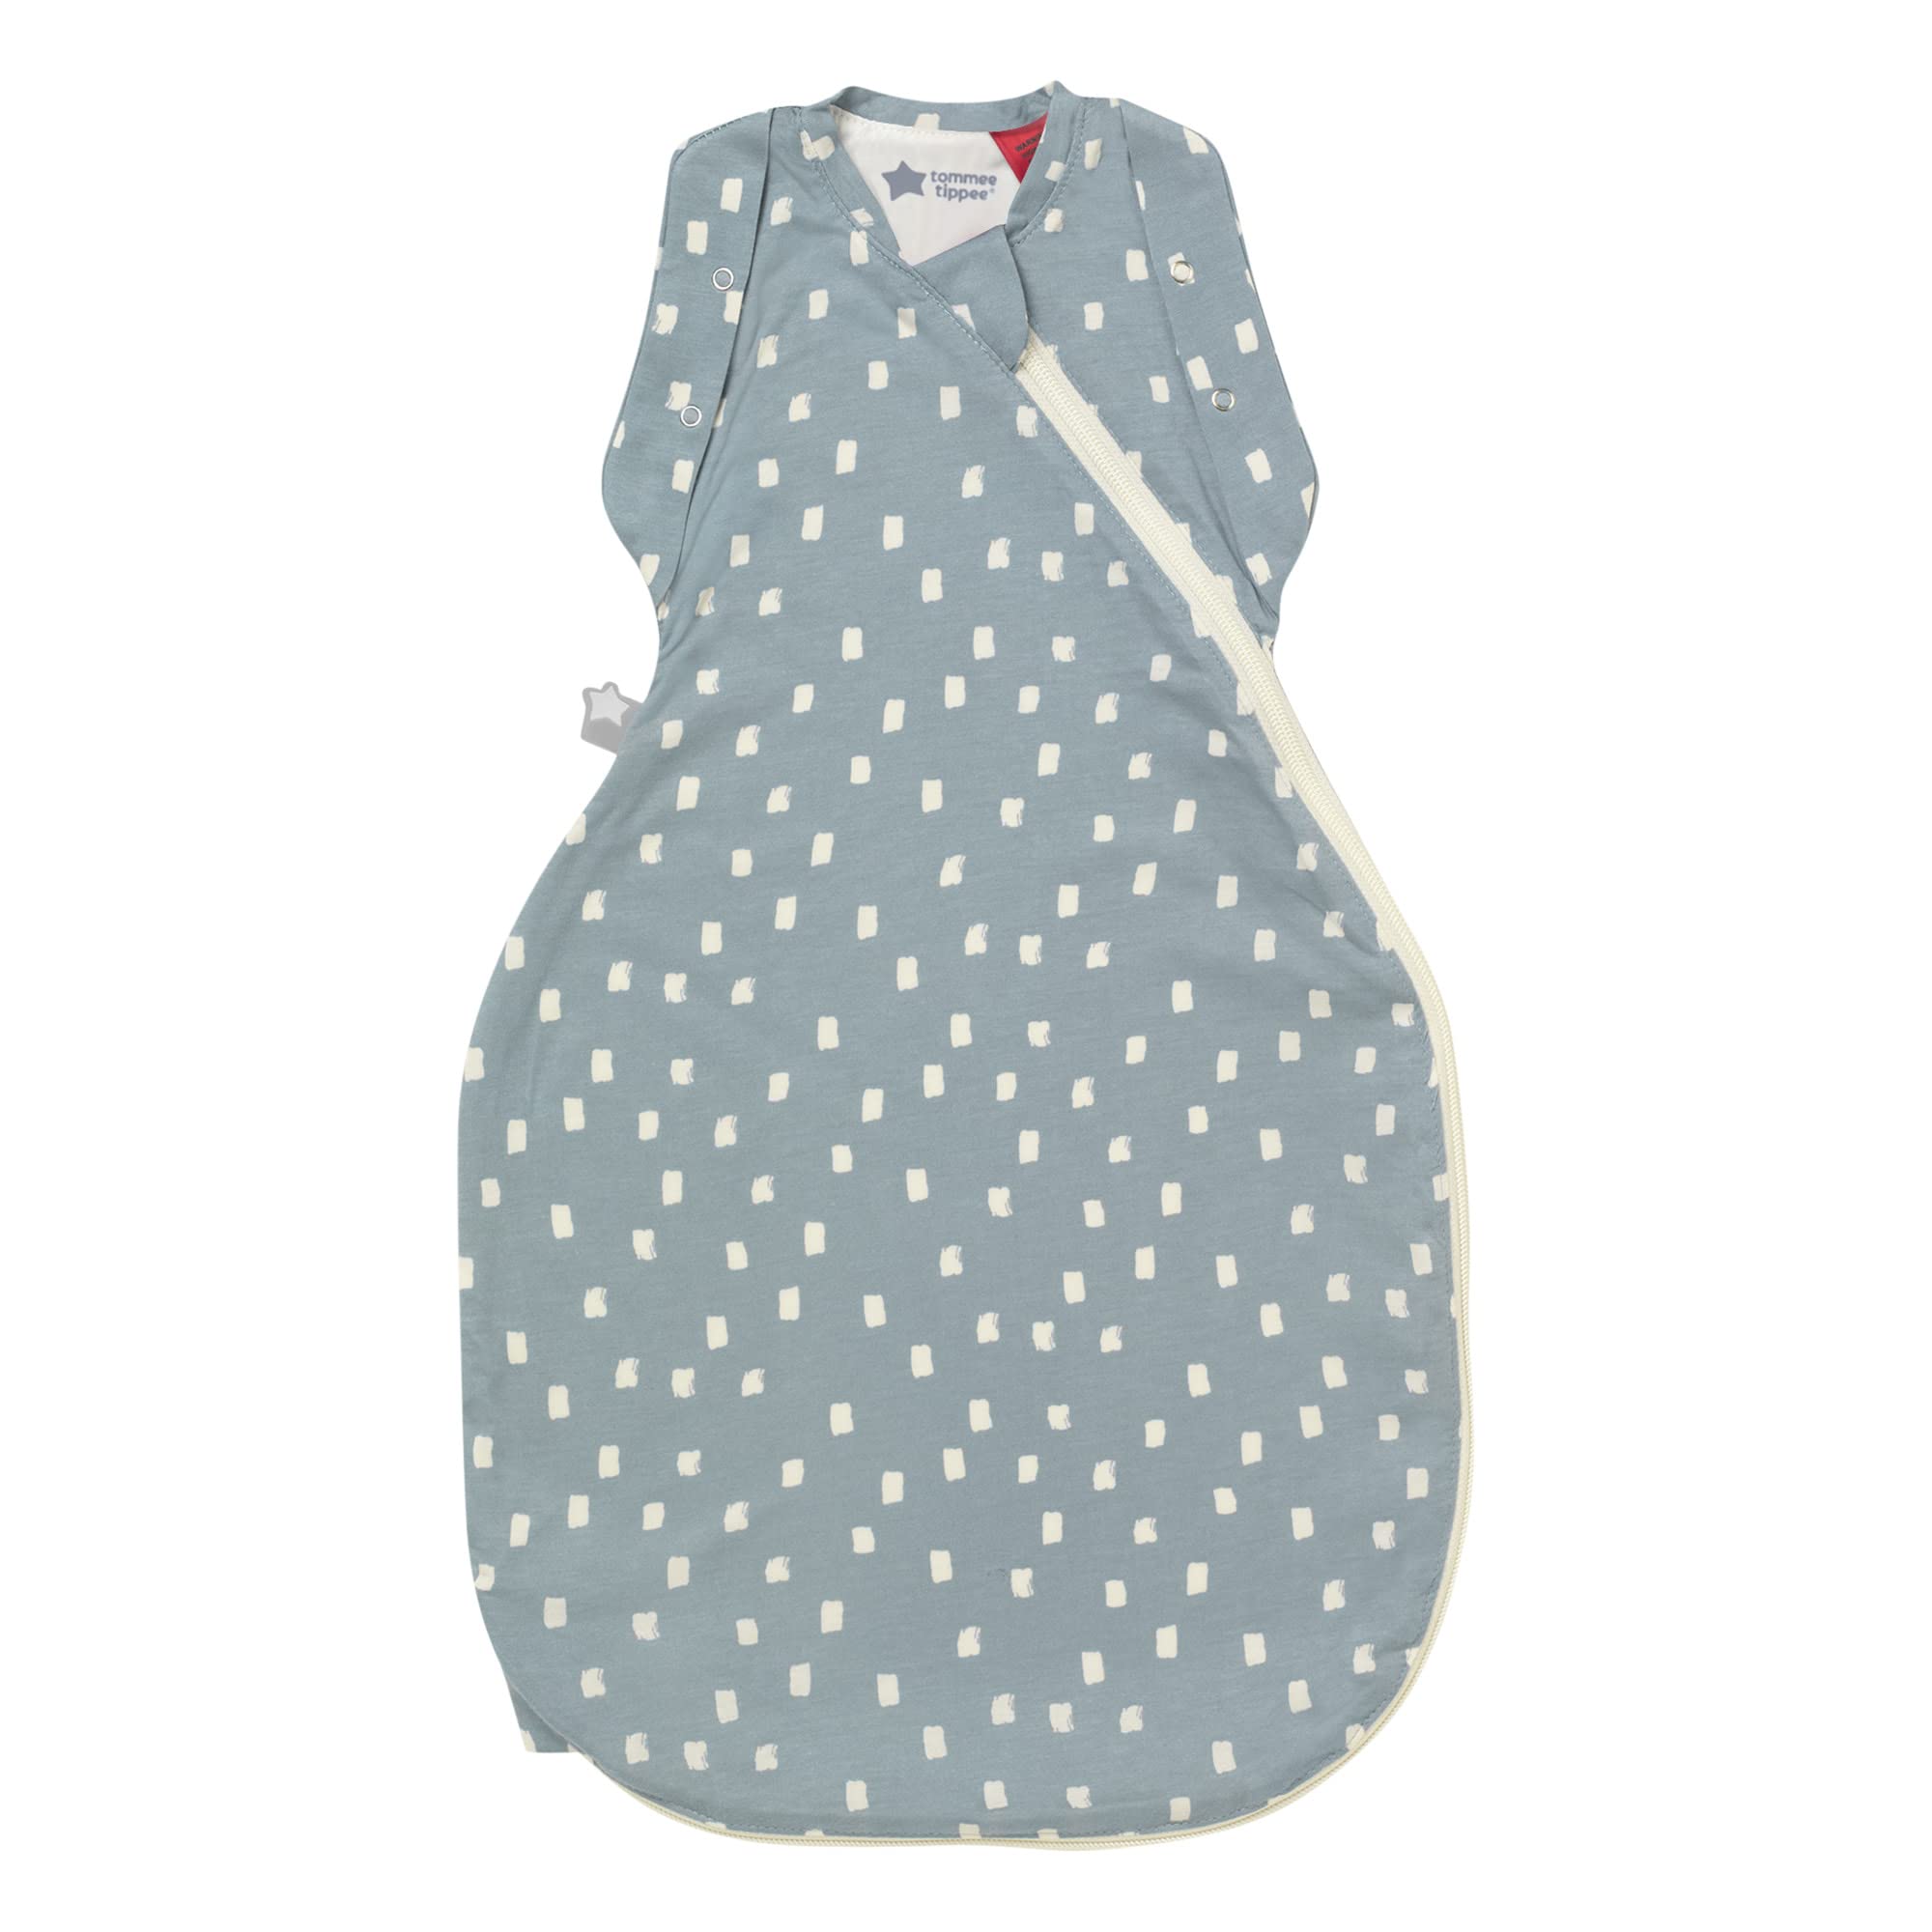 Tommee Tippee Baby Sleep Bag for Newborns, 0-3m, 1.0 TOG, The Original Grobag Swaddle Bag, Hip-Healthy Design, Soft Bamboo-Rich Fabric, Soft Navy Speckle